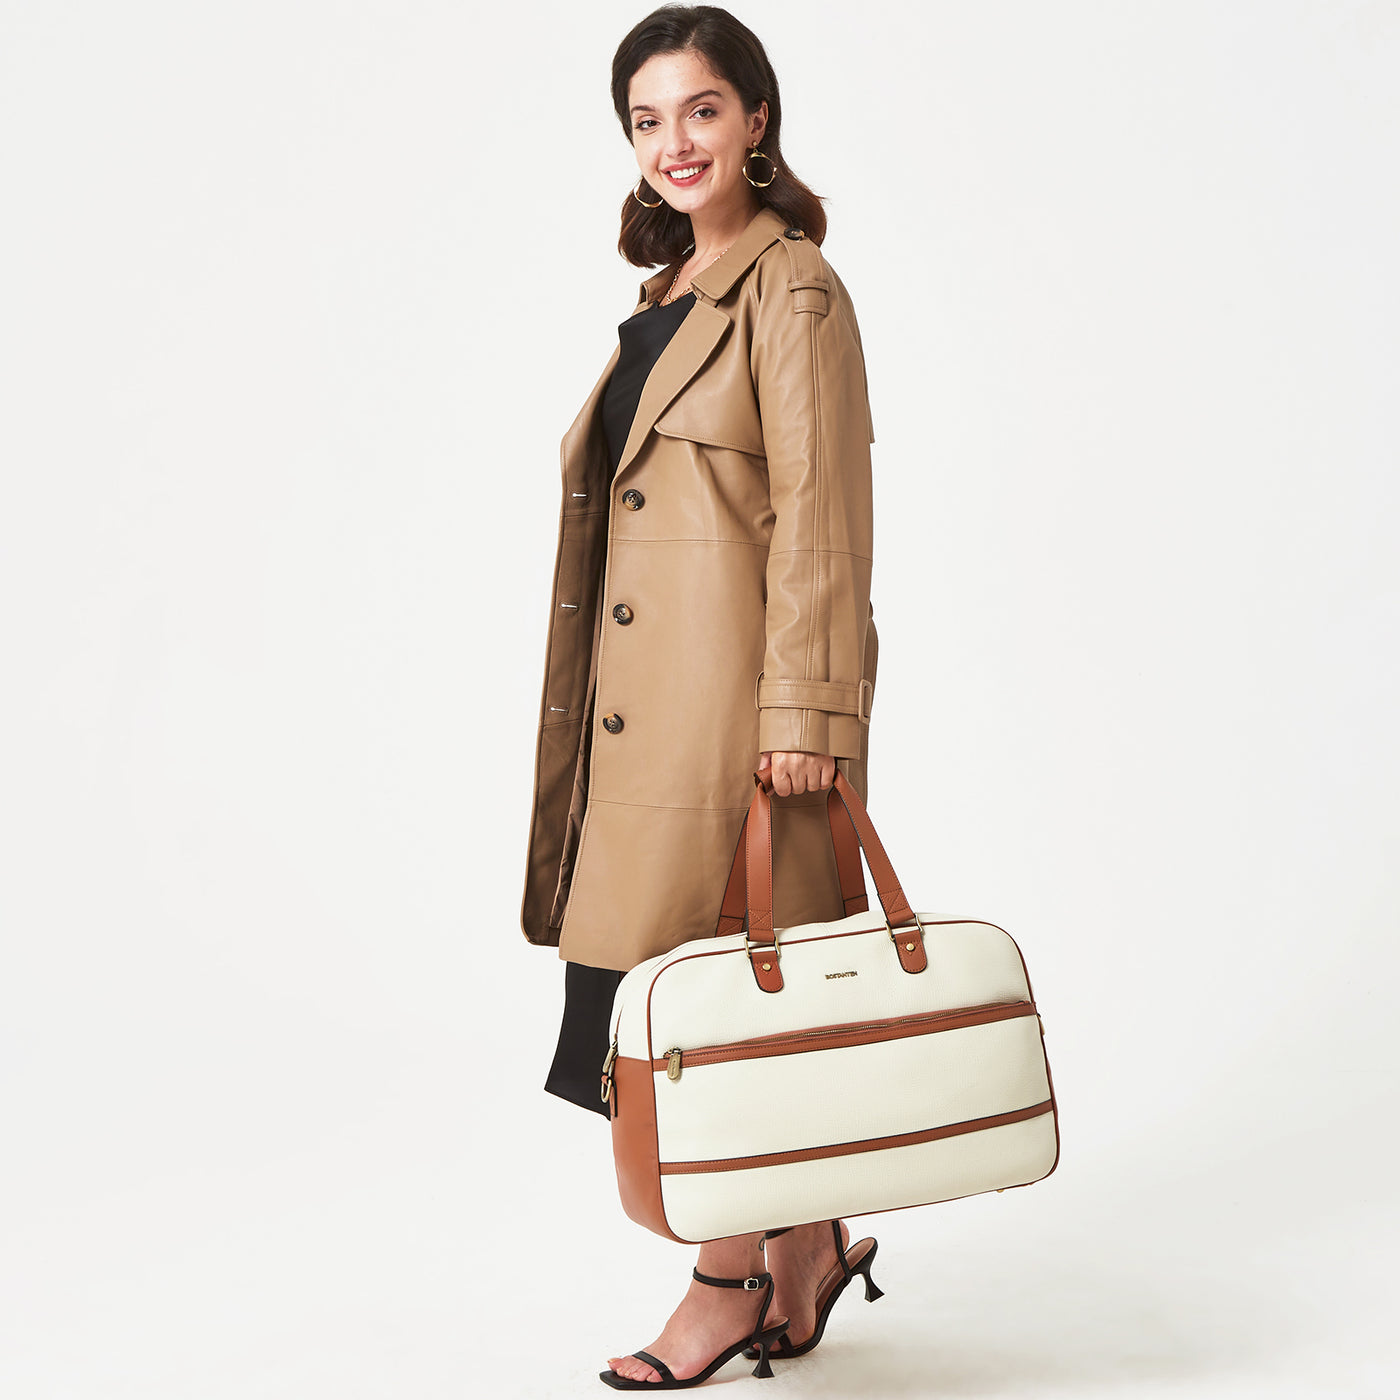 Zenobe Chic and Practical: Women's Leather Travel Duffle Bag for